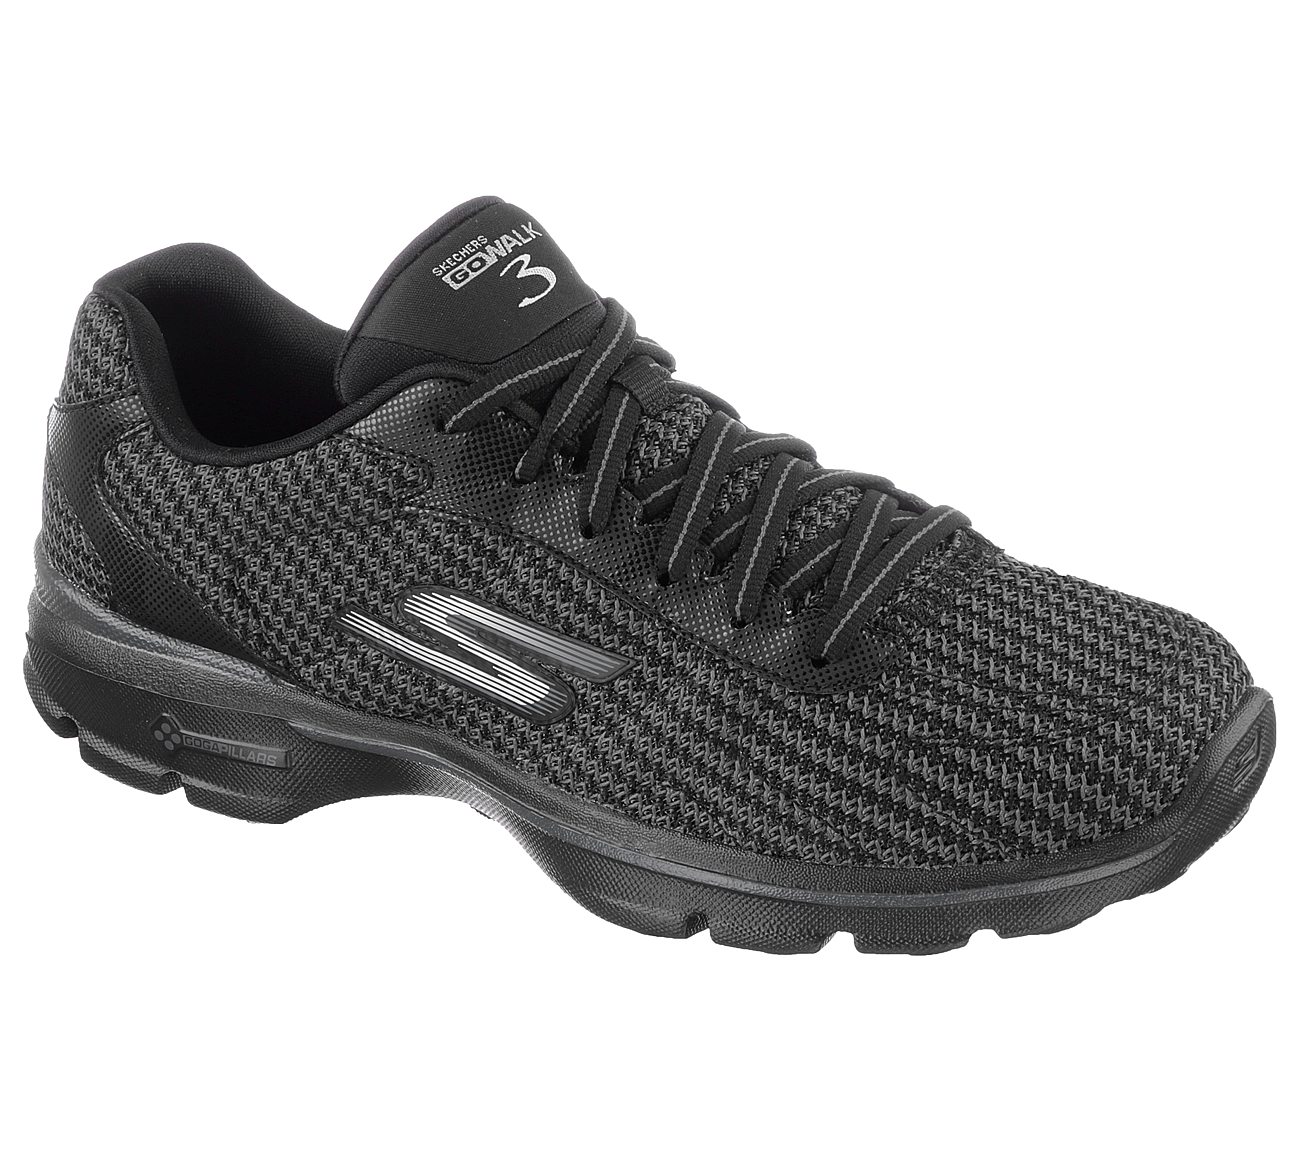 skechers go walk 3 fitknit lace up